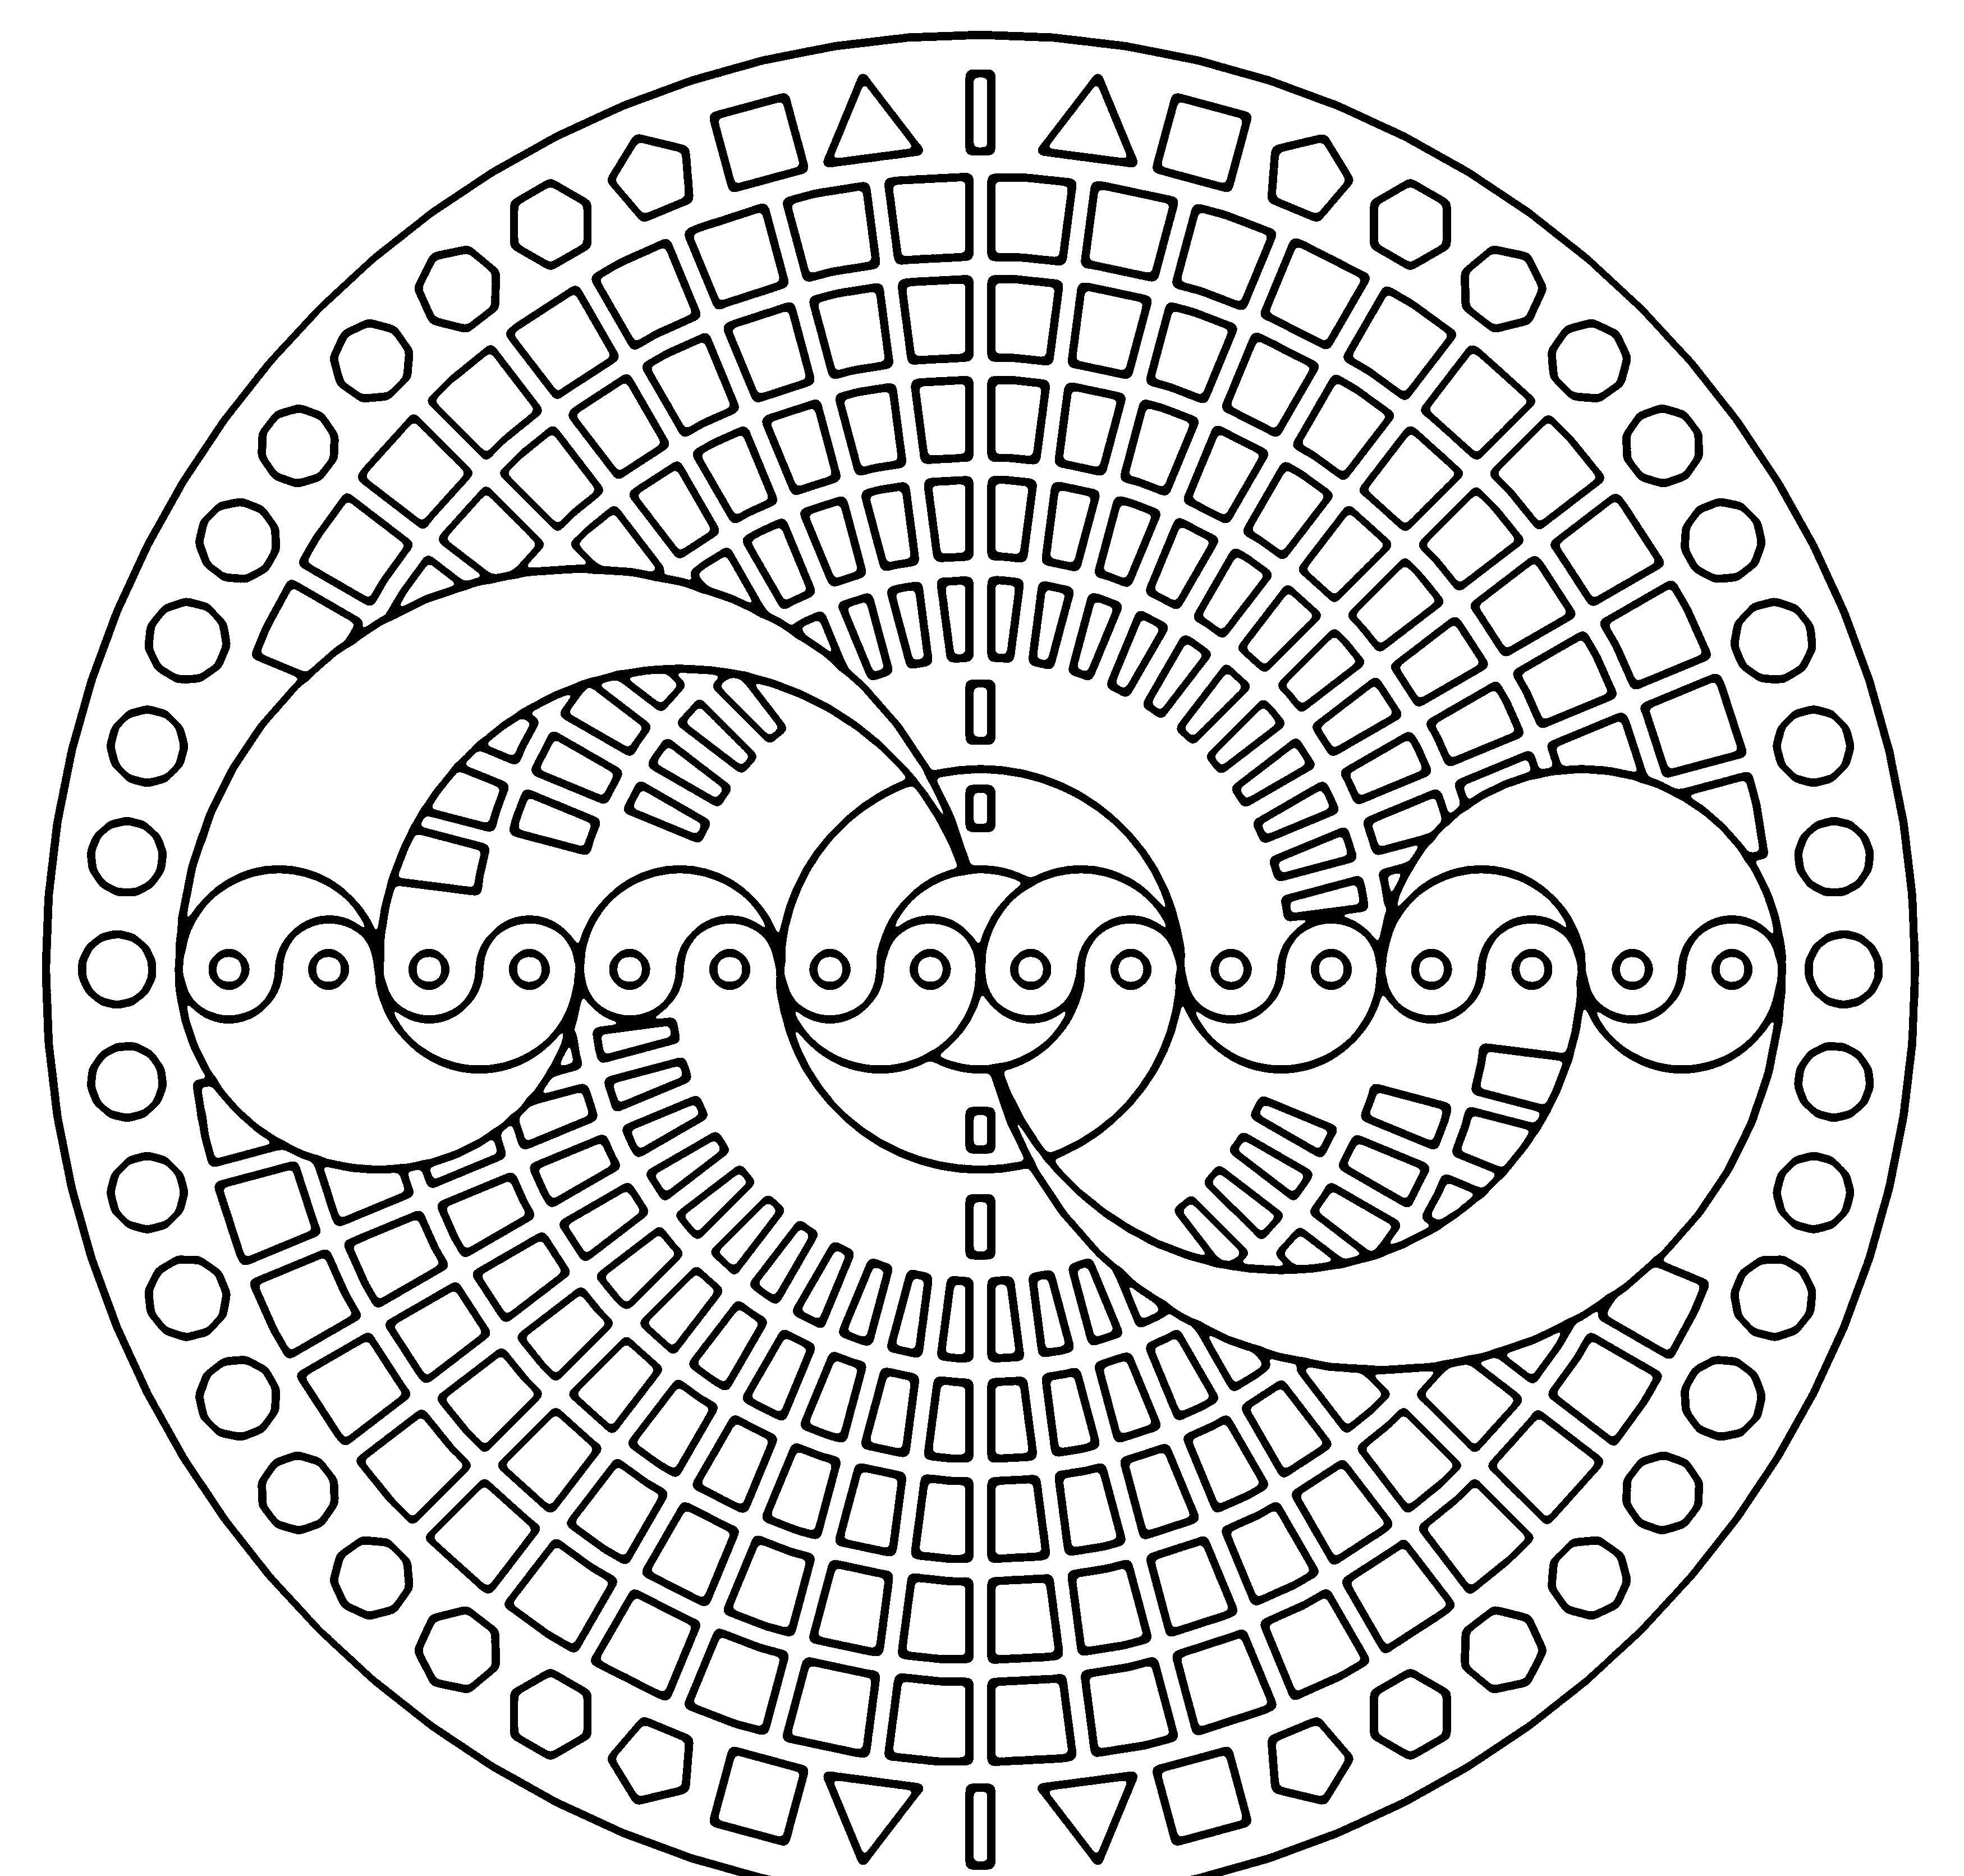 Coloring Ornament. Category pattern ornament stencil. Tags:  ornament, patterns, medallion.